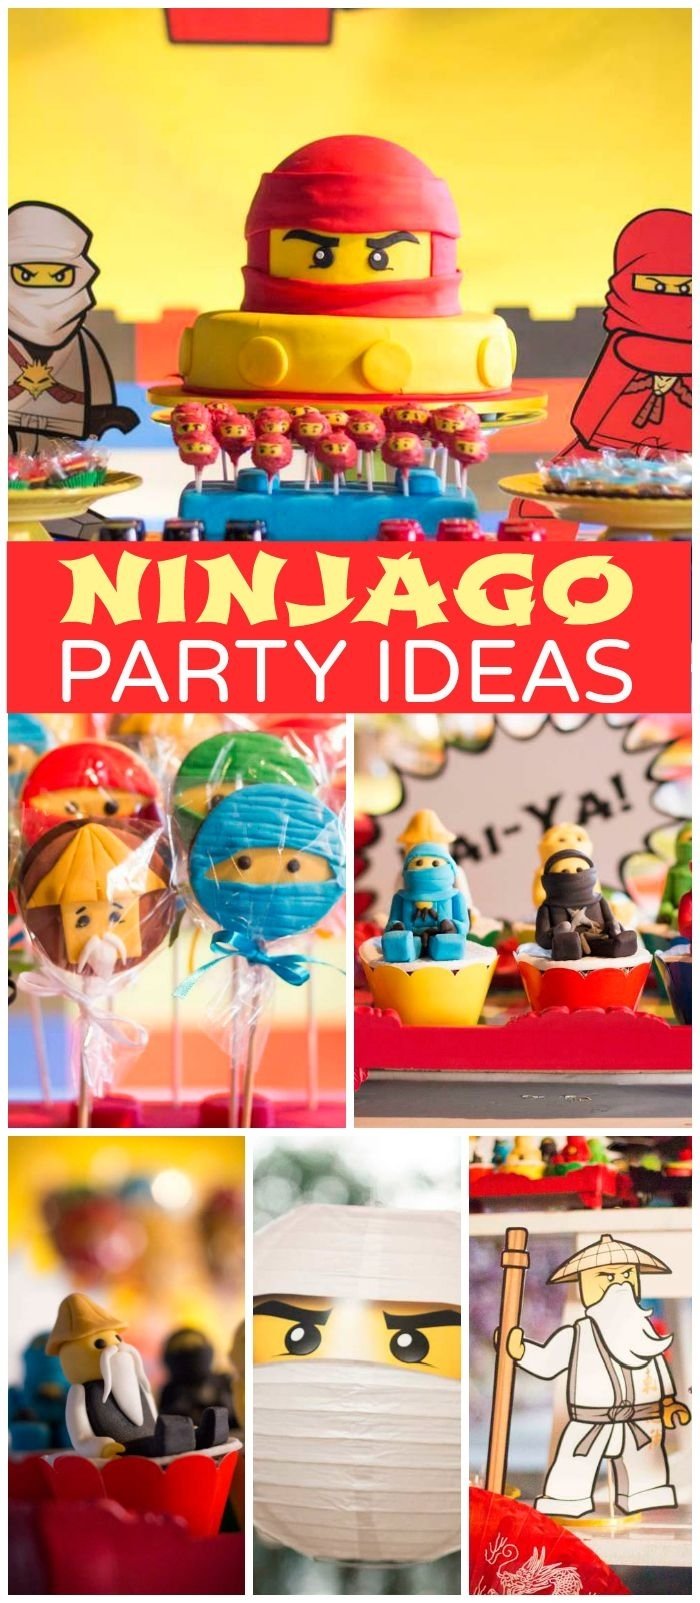 10 Ideal Birthday Party Ideas For Boys Age 6 116 best ninjago party ideas images on pinterest birthday party 2022